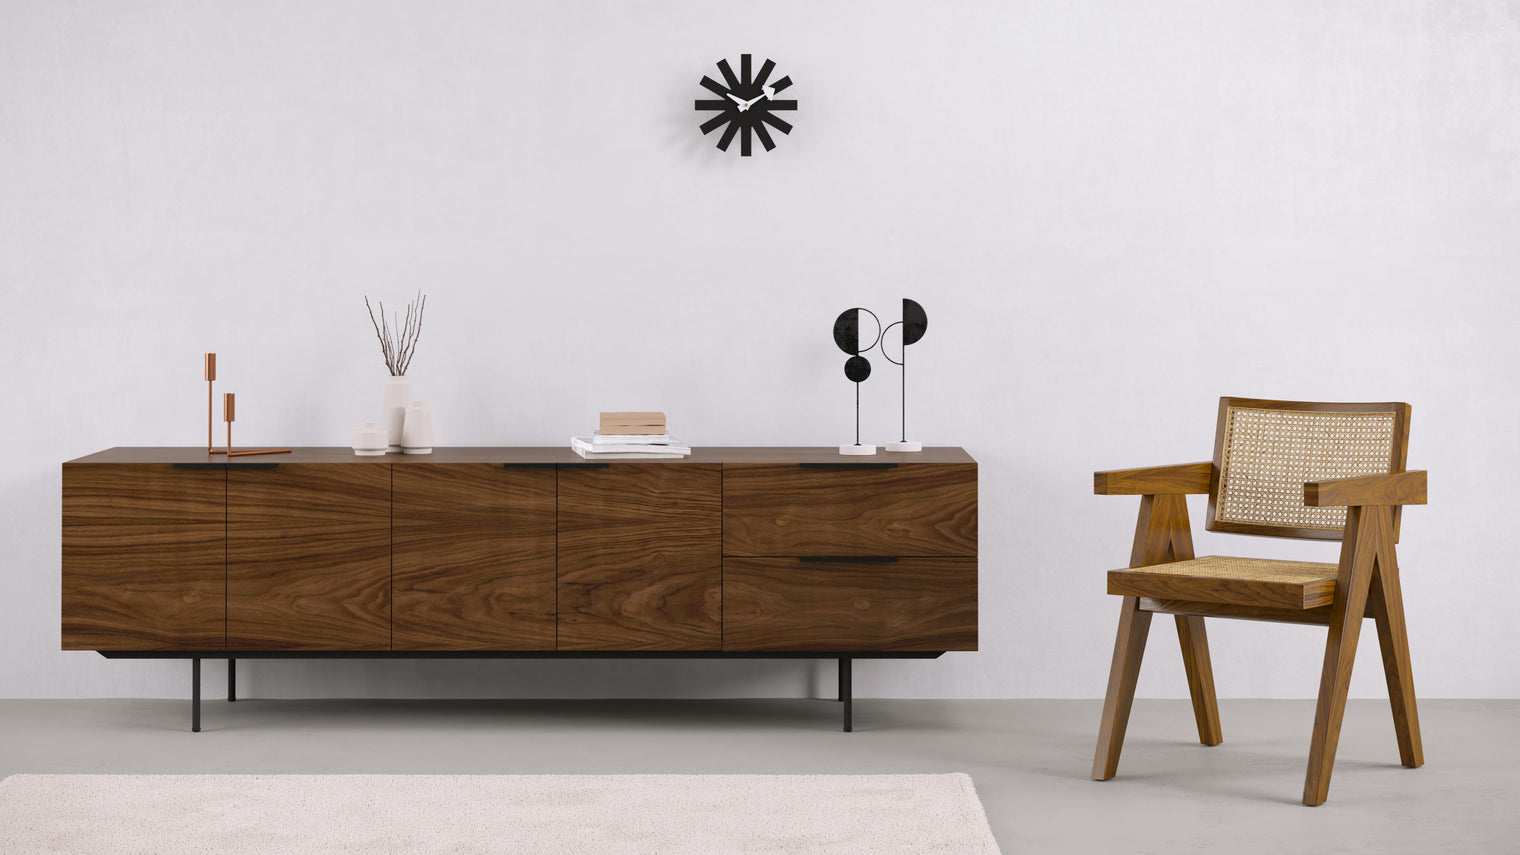 Ahead of its Time | Flaunting a mesmerizing appearance that balances minimalist and mid-century modern styles, the Asterisk Clock is sure to catch eyes and turn heads no matter where it’s featured. Kitchens, bedrooms, and living rooms are all great options for this wall clock.
